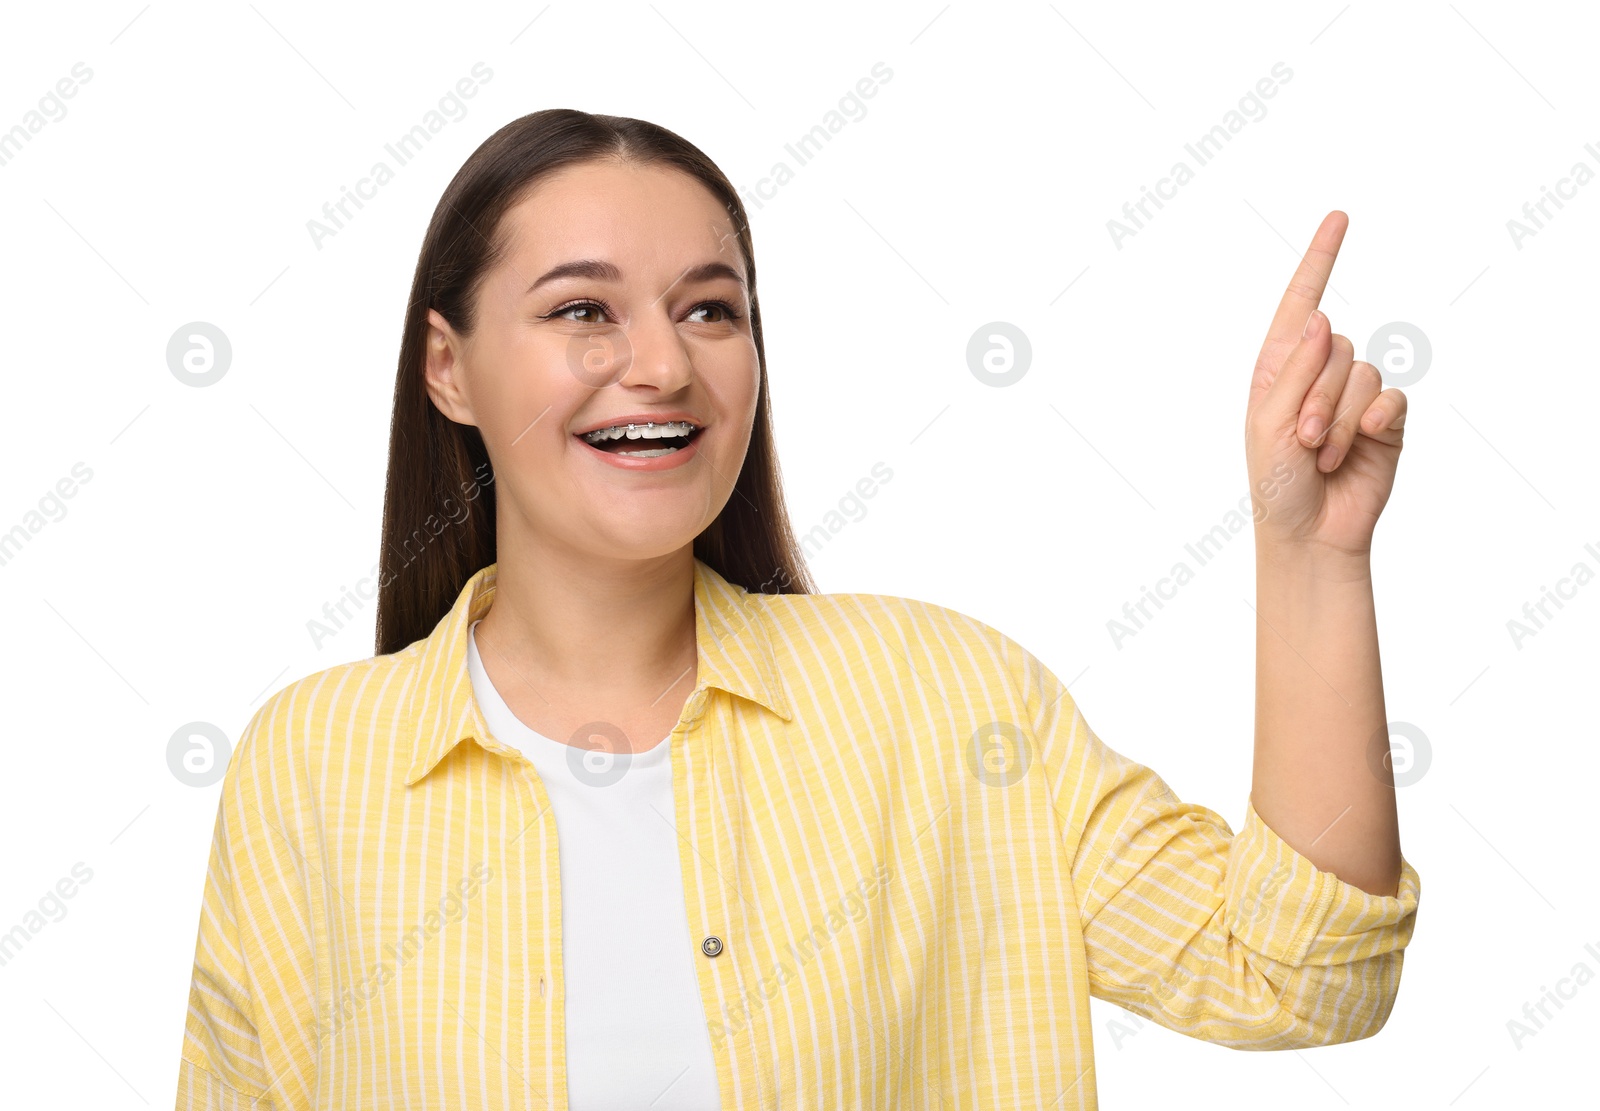 Photo of Smiling woman with dental braces pointing at something on white background